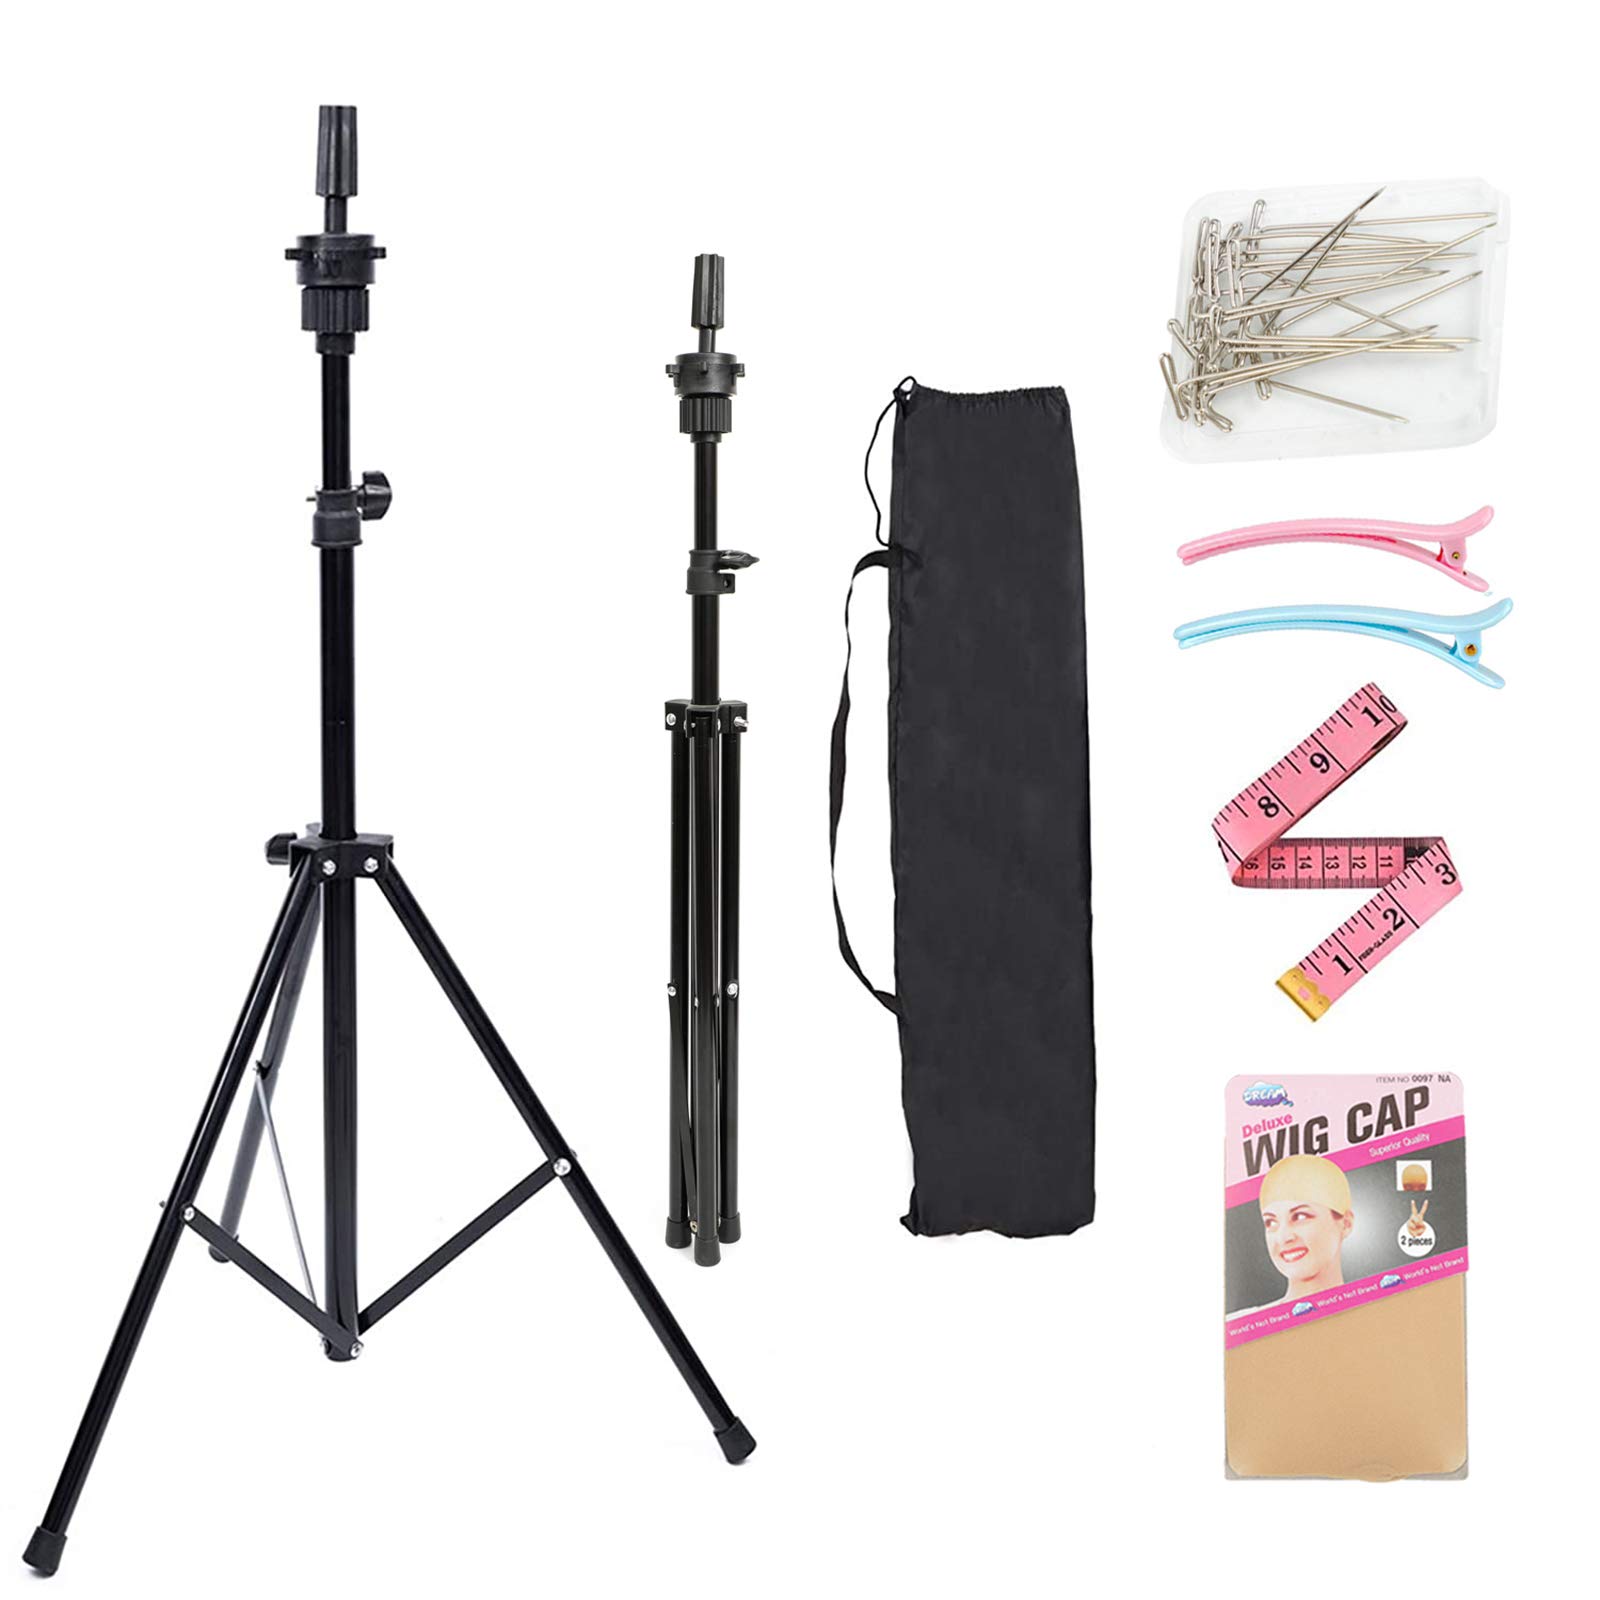 Canvas Wig Head Stand Holder, Mannequin Head Tripod Stand